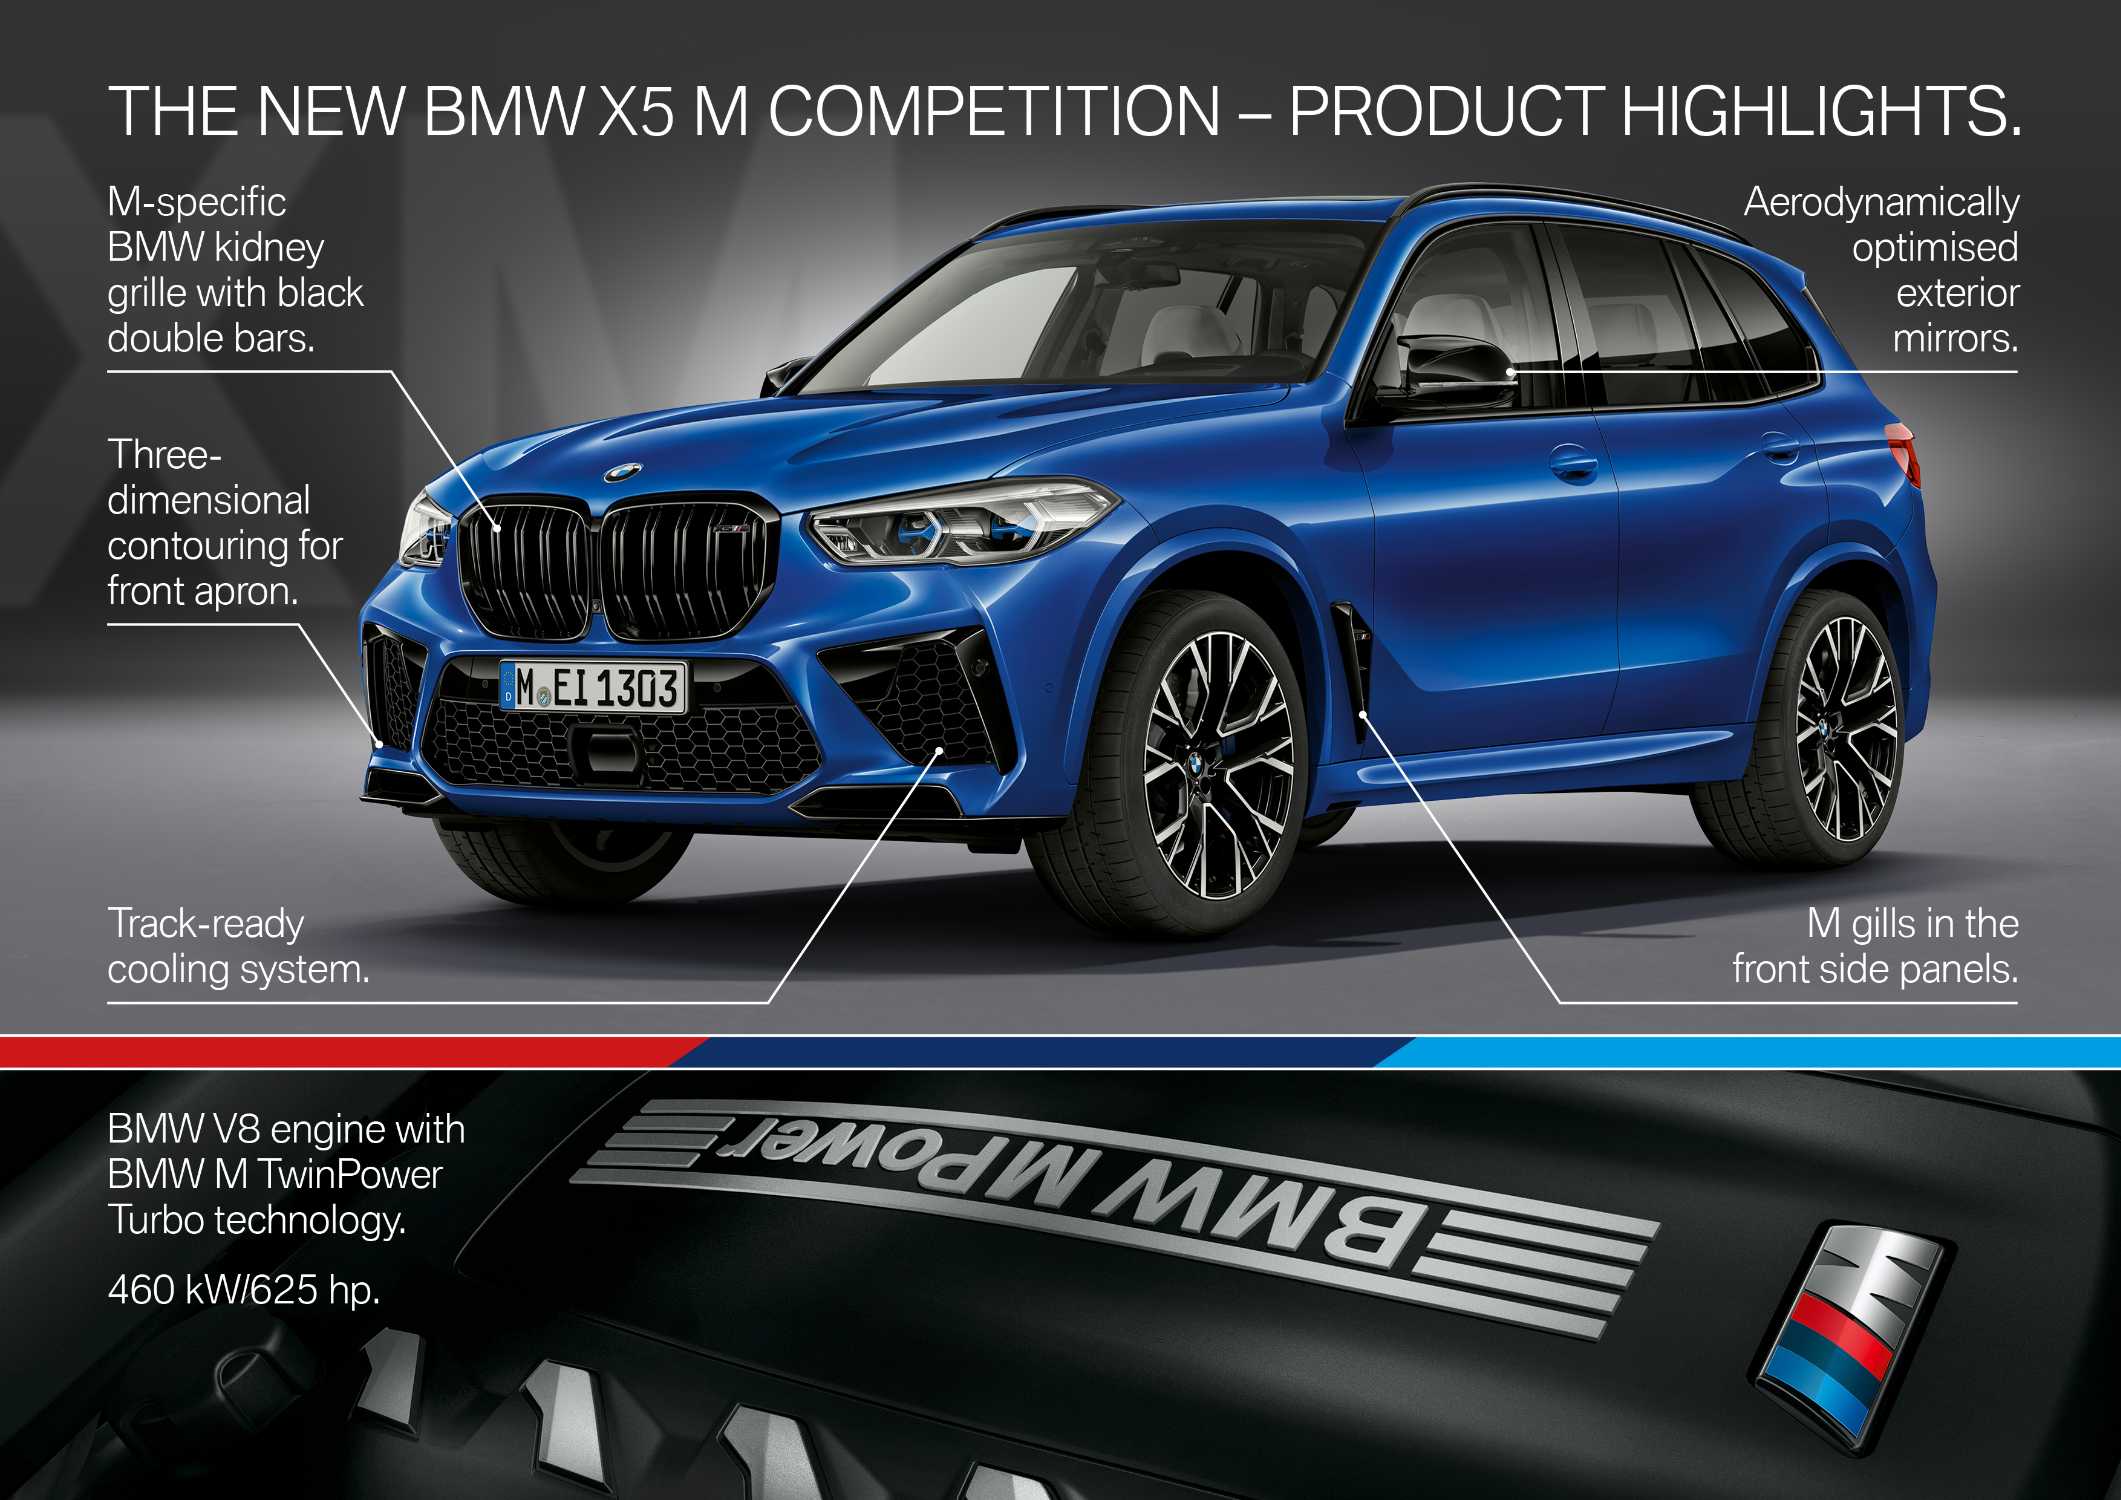 The new BMW X5 M and BMW X5 M Competition. (10/2019)